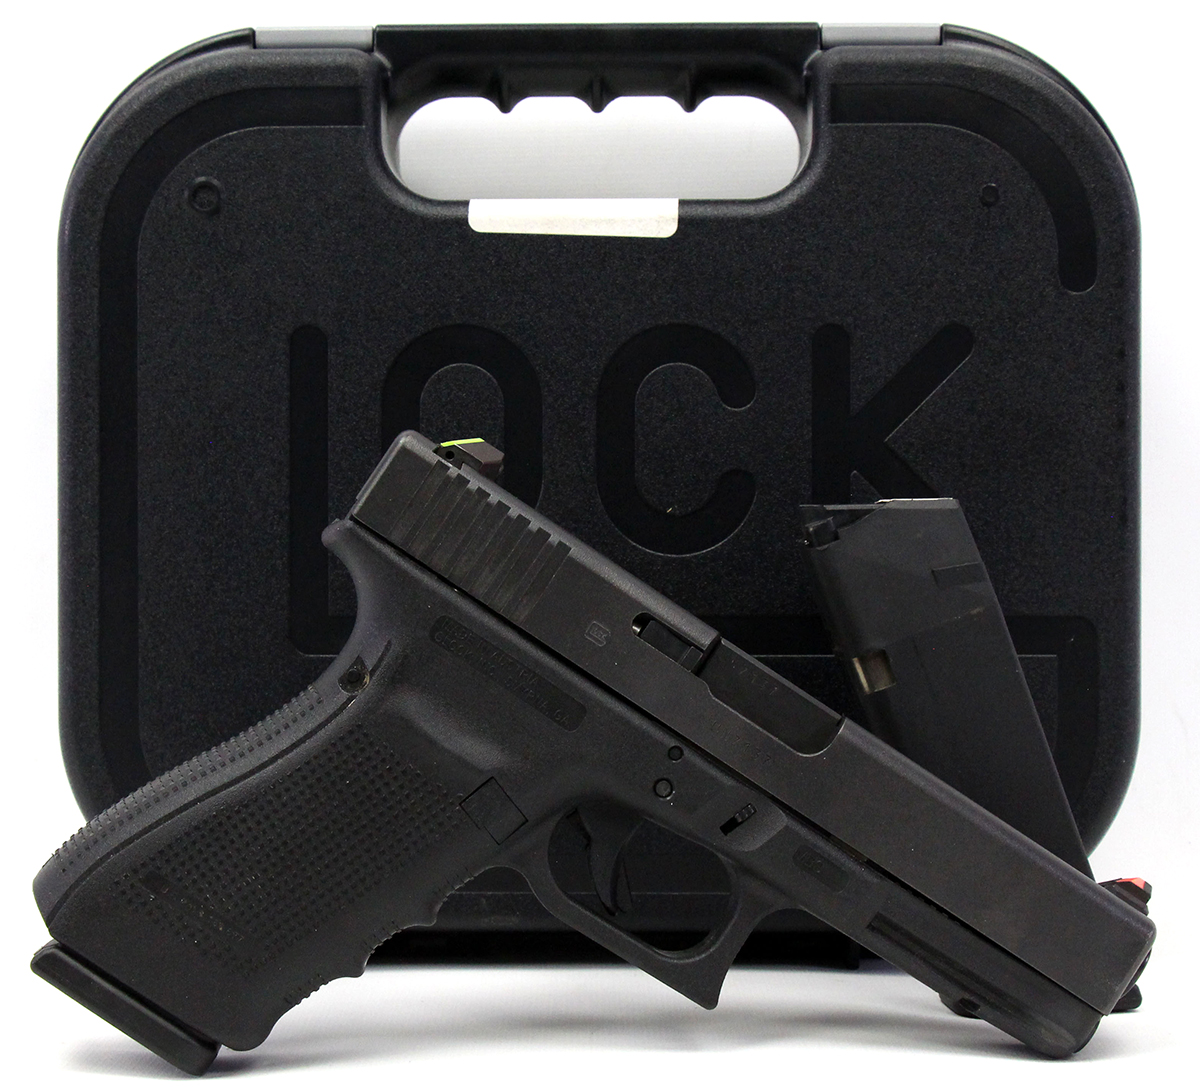 Glock 21 Gen4 45 ACP Pistol - Used in Good Condition with Box